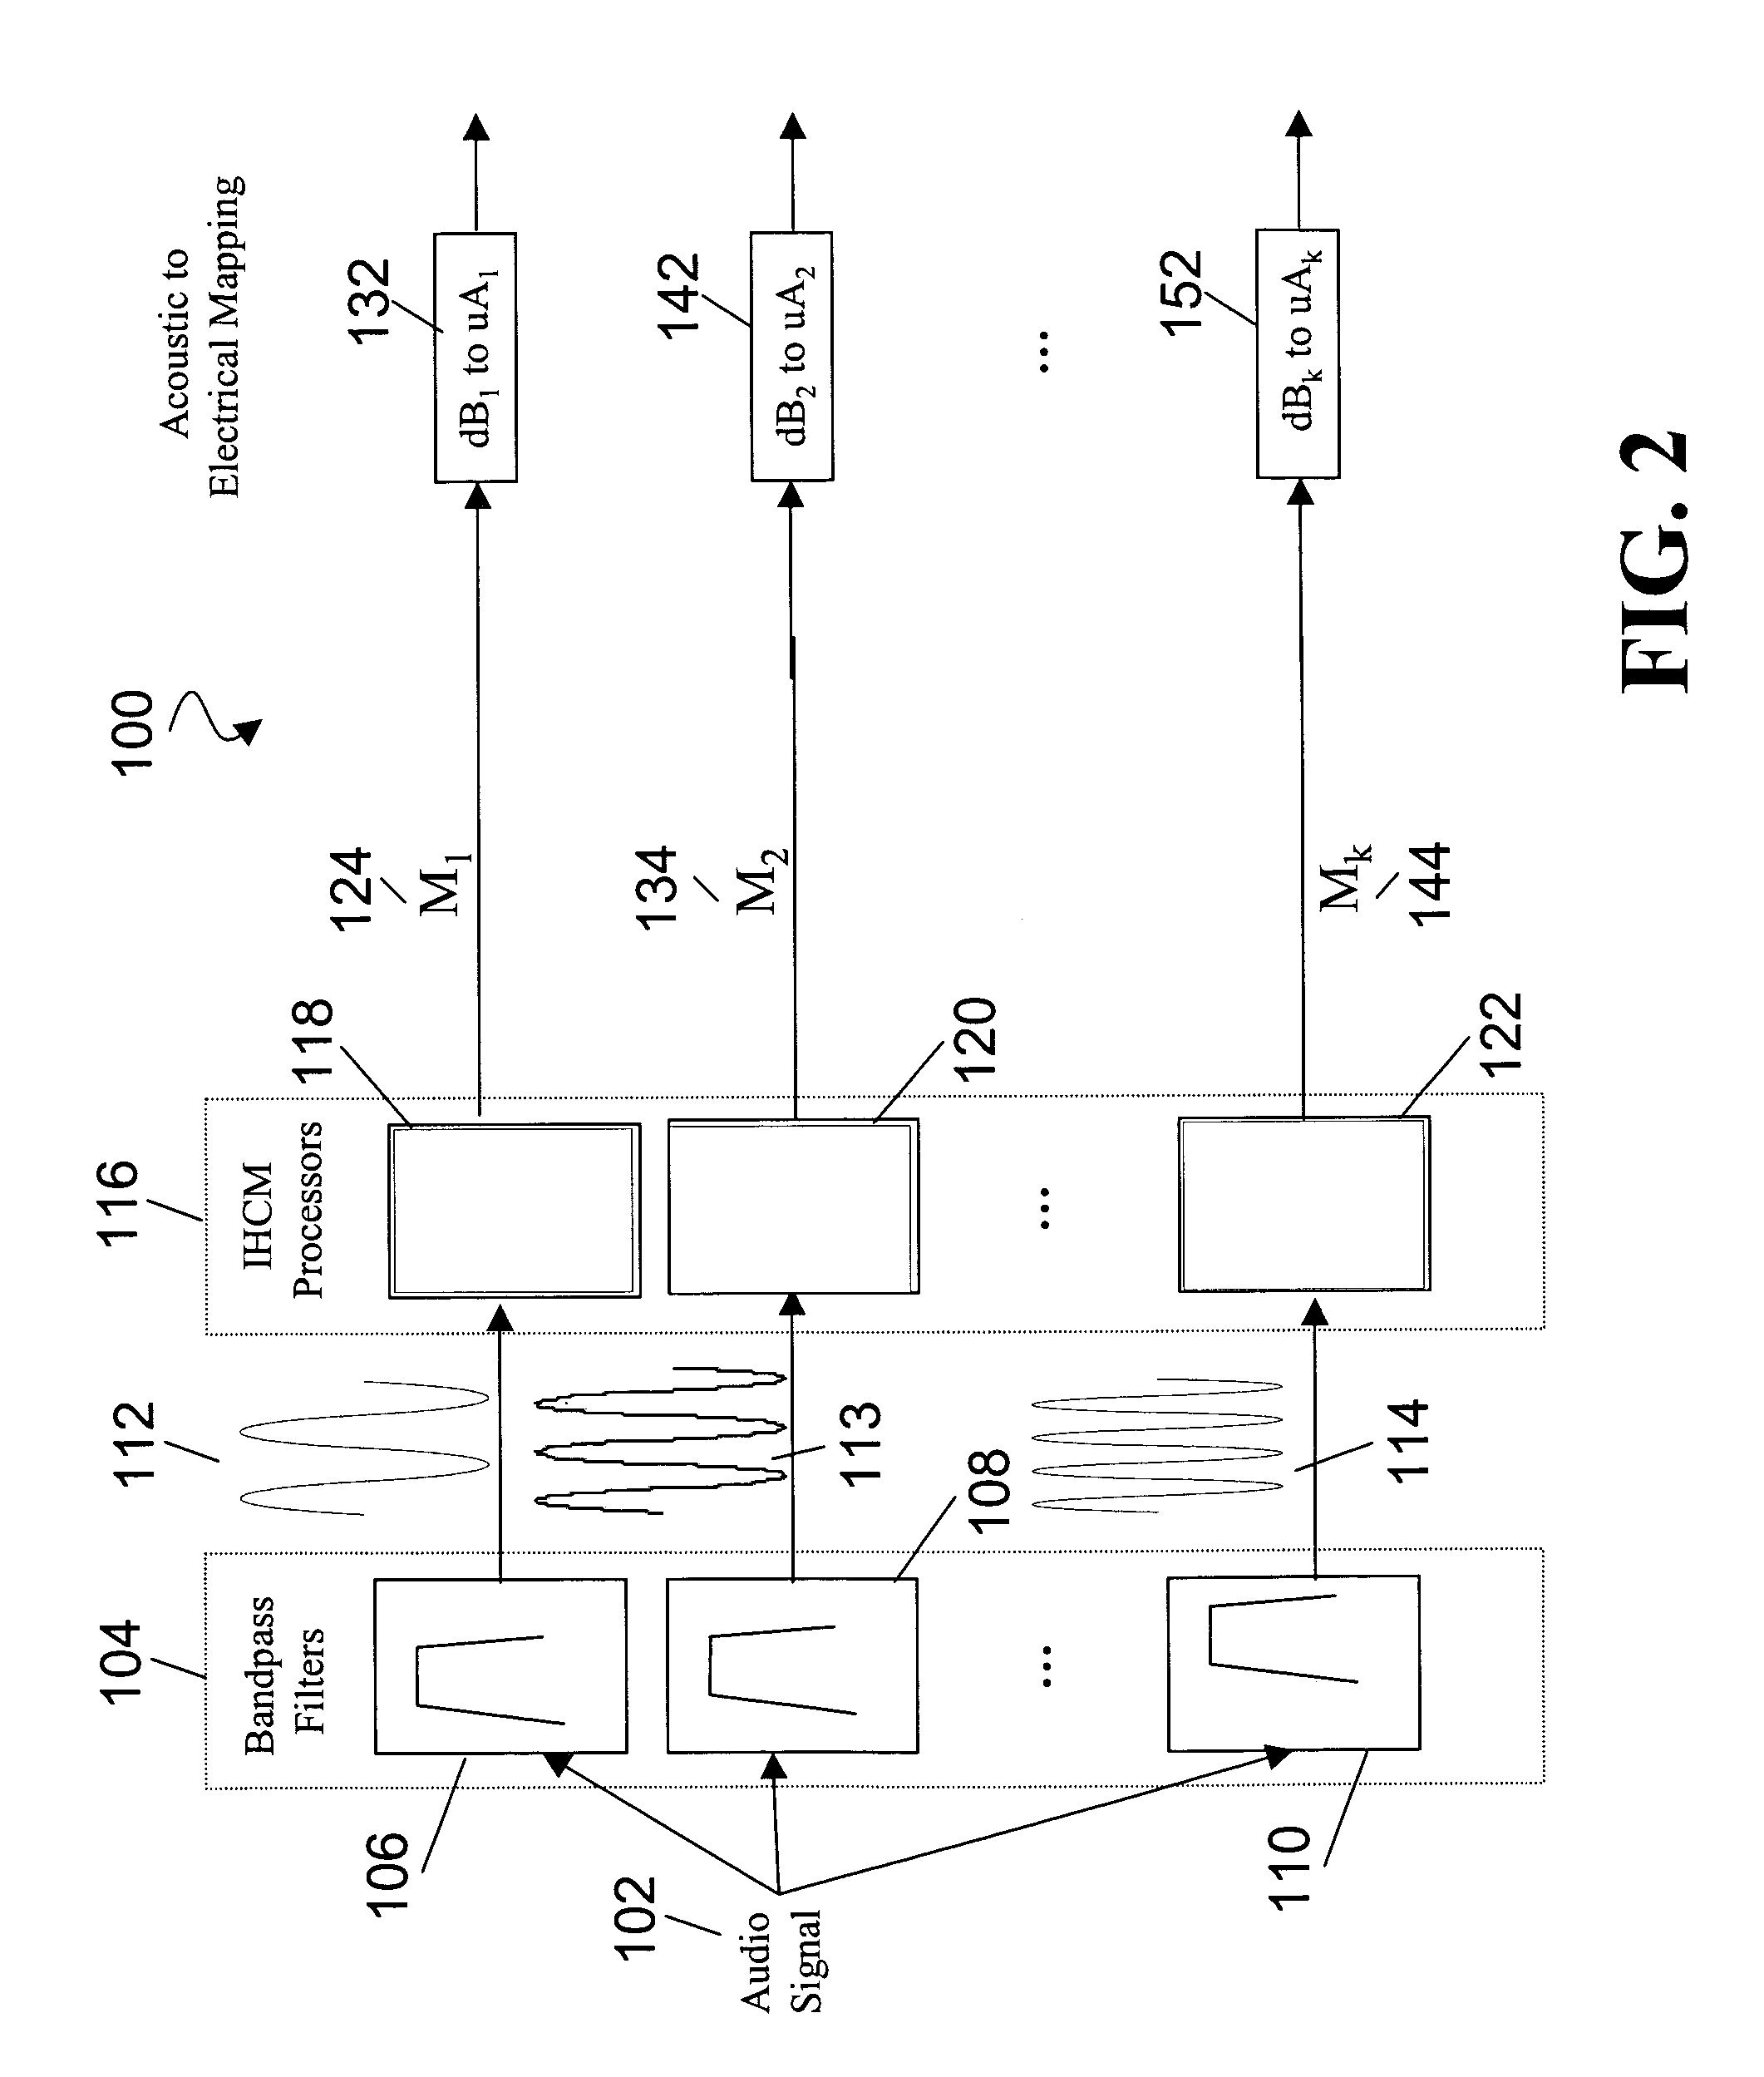 Inner hair cell stimulation model for the use by an intra-cochlear implant